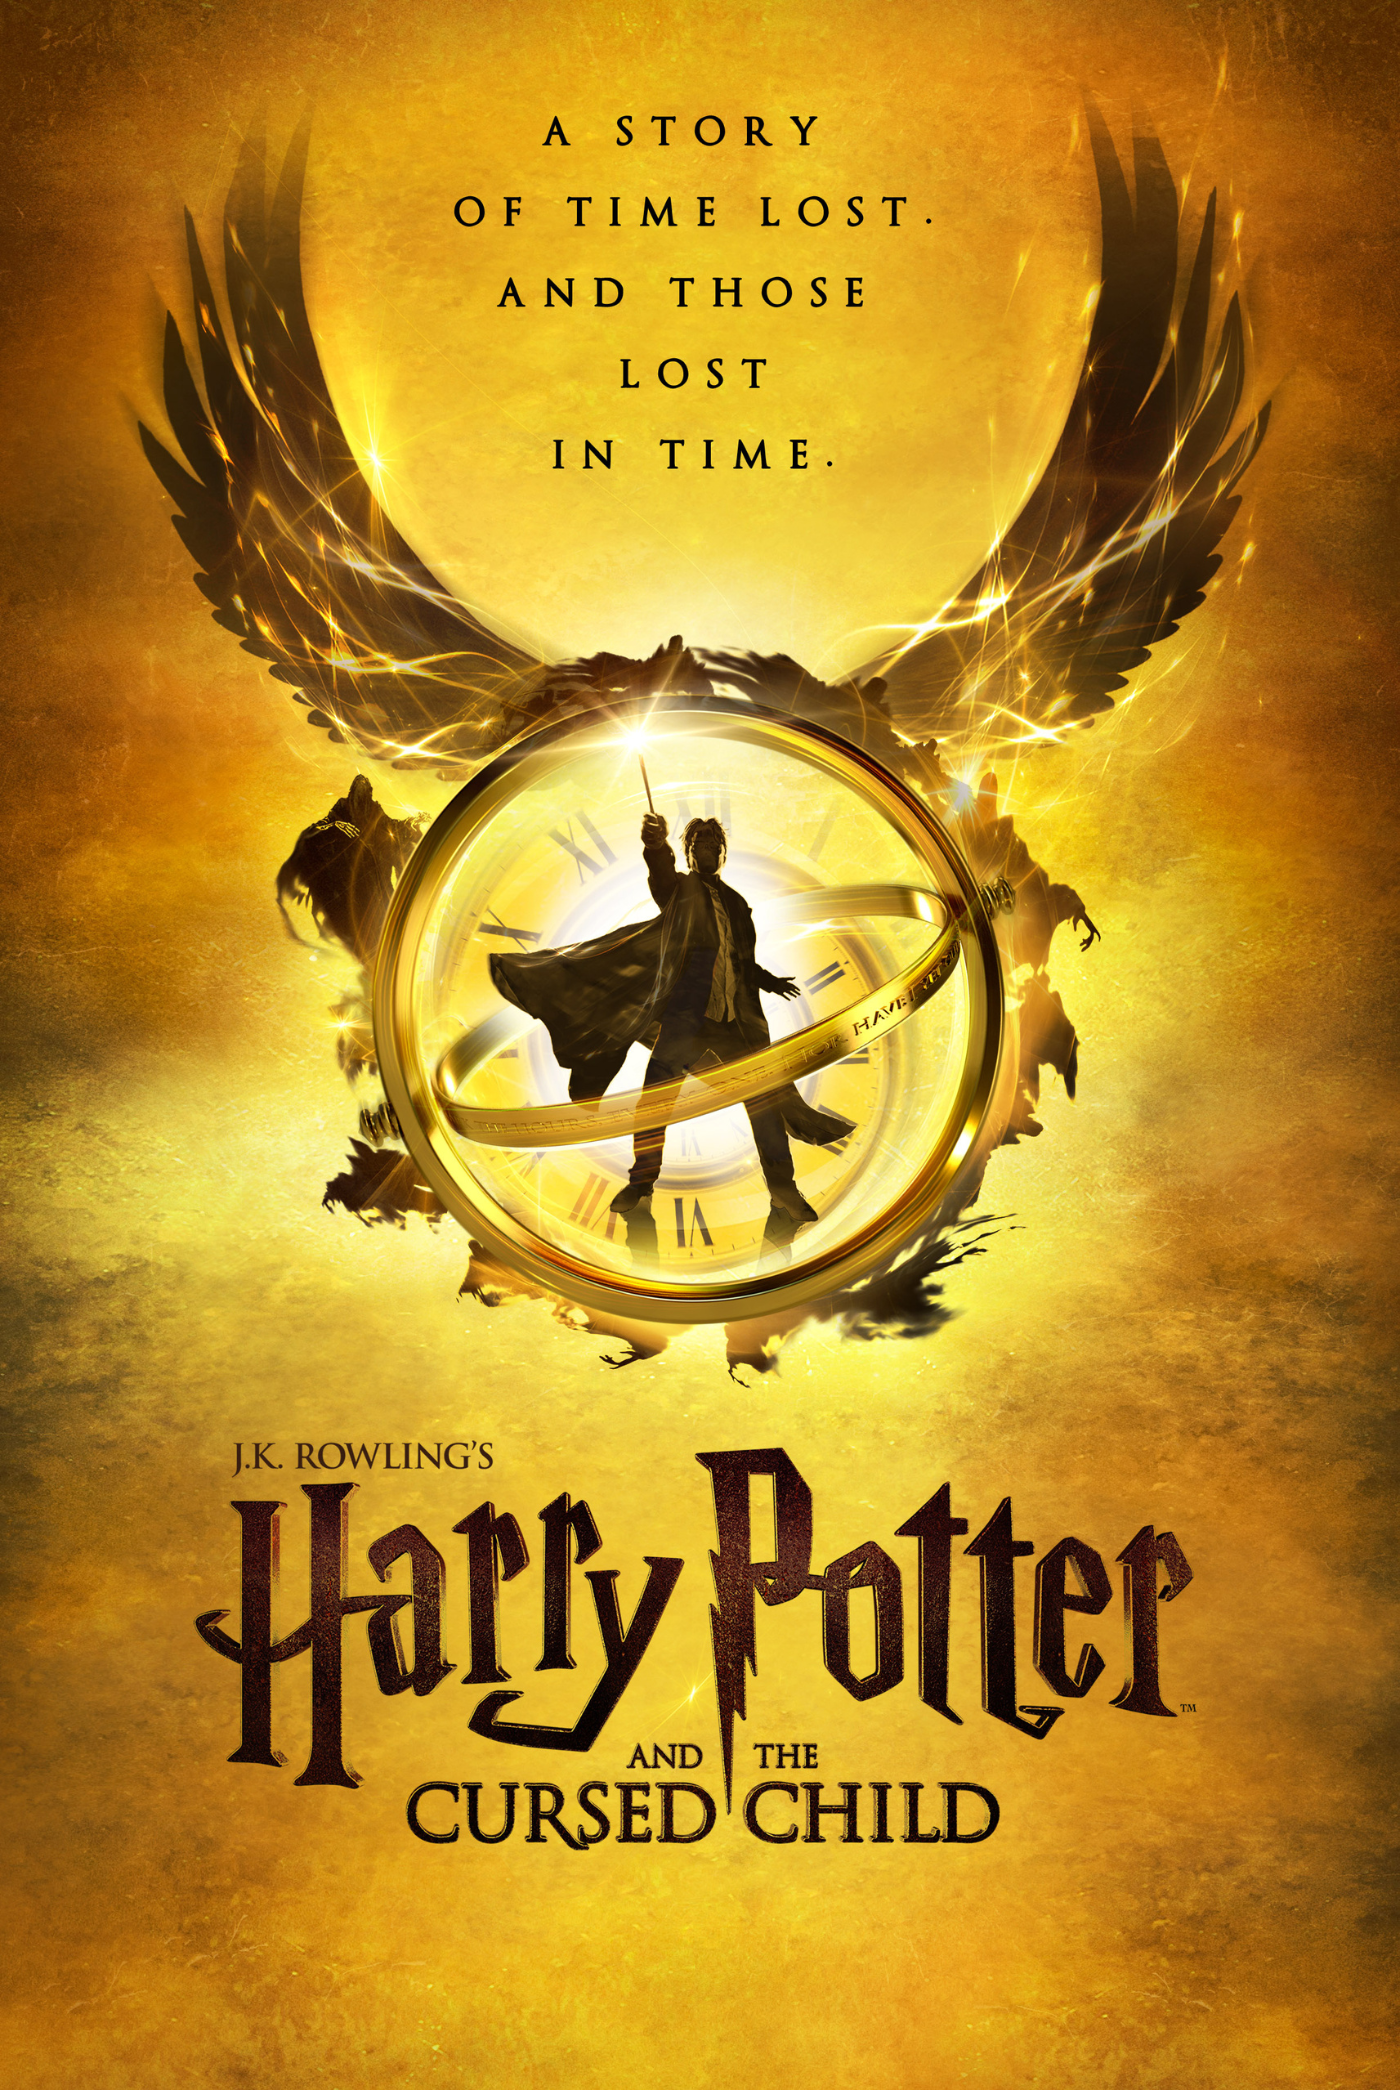 Jack Thorne, Harry Potter and the Cursed Child Poster.png